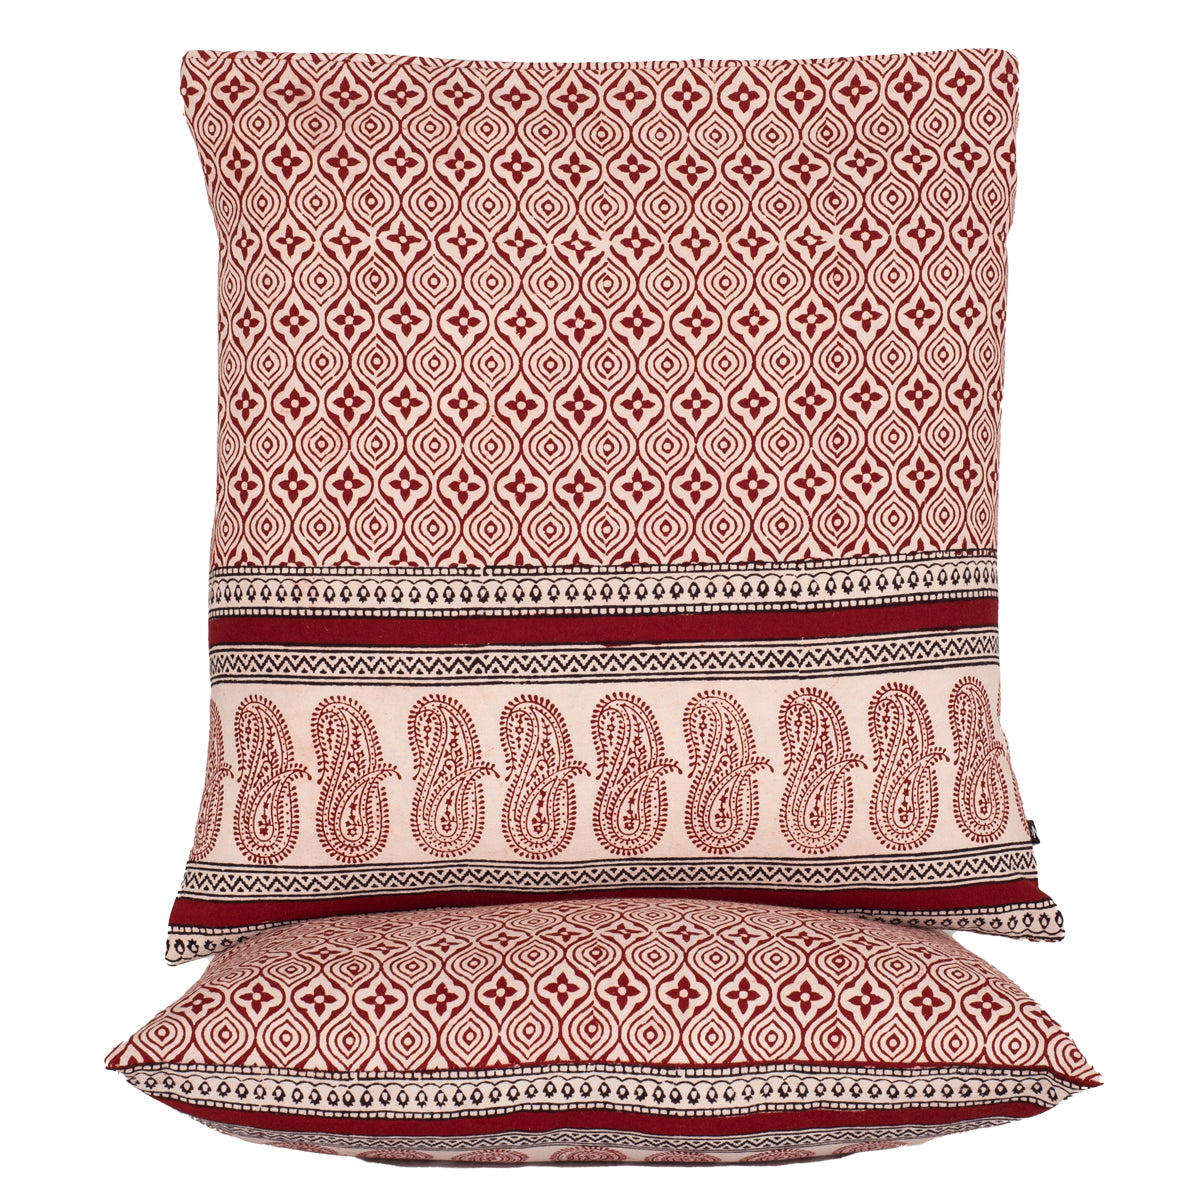 Geometric Pattern with Paisley Border Bagh Hand Block Print Cotton Cushion Cover - Red Black-1